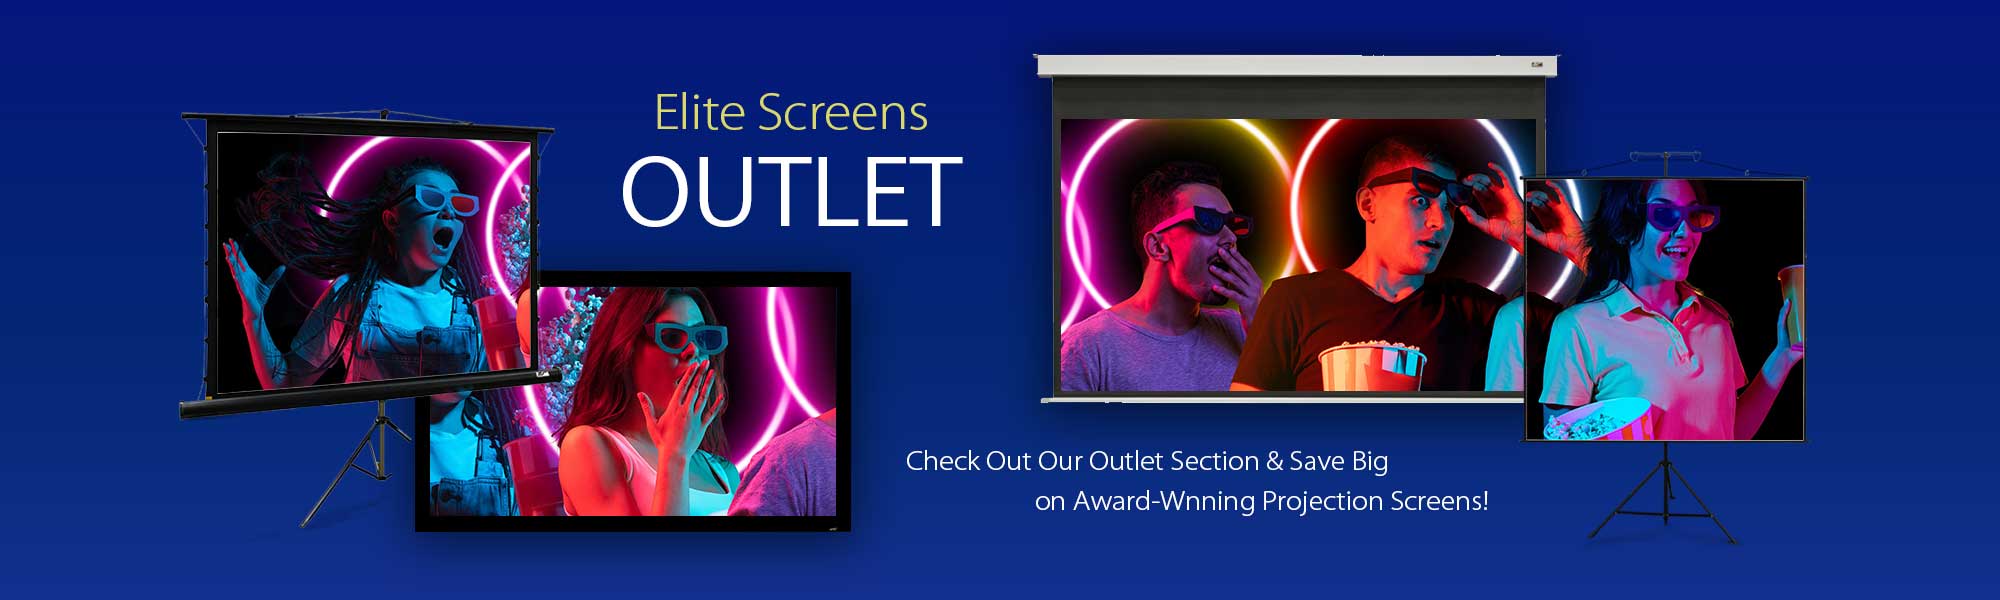 Elite Screens Outlet Projector Screens